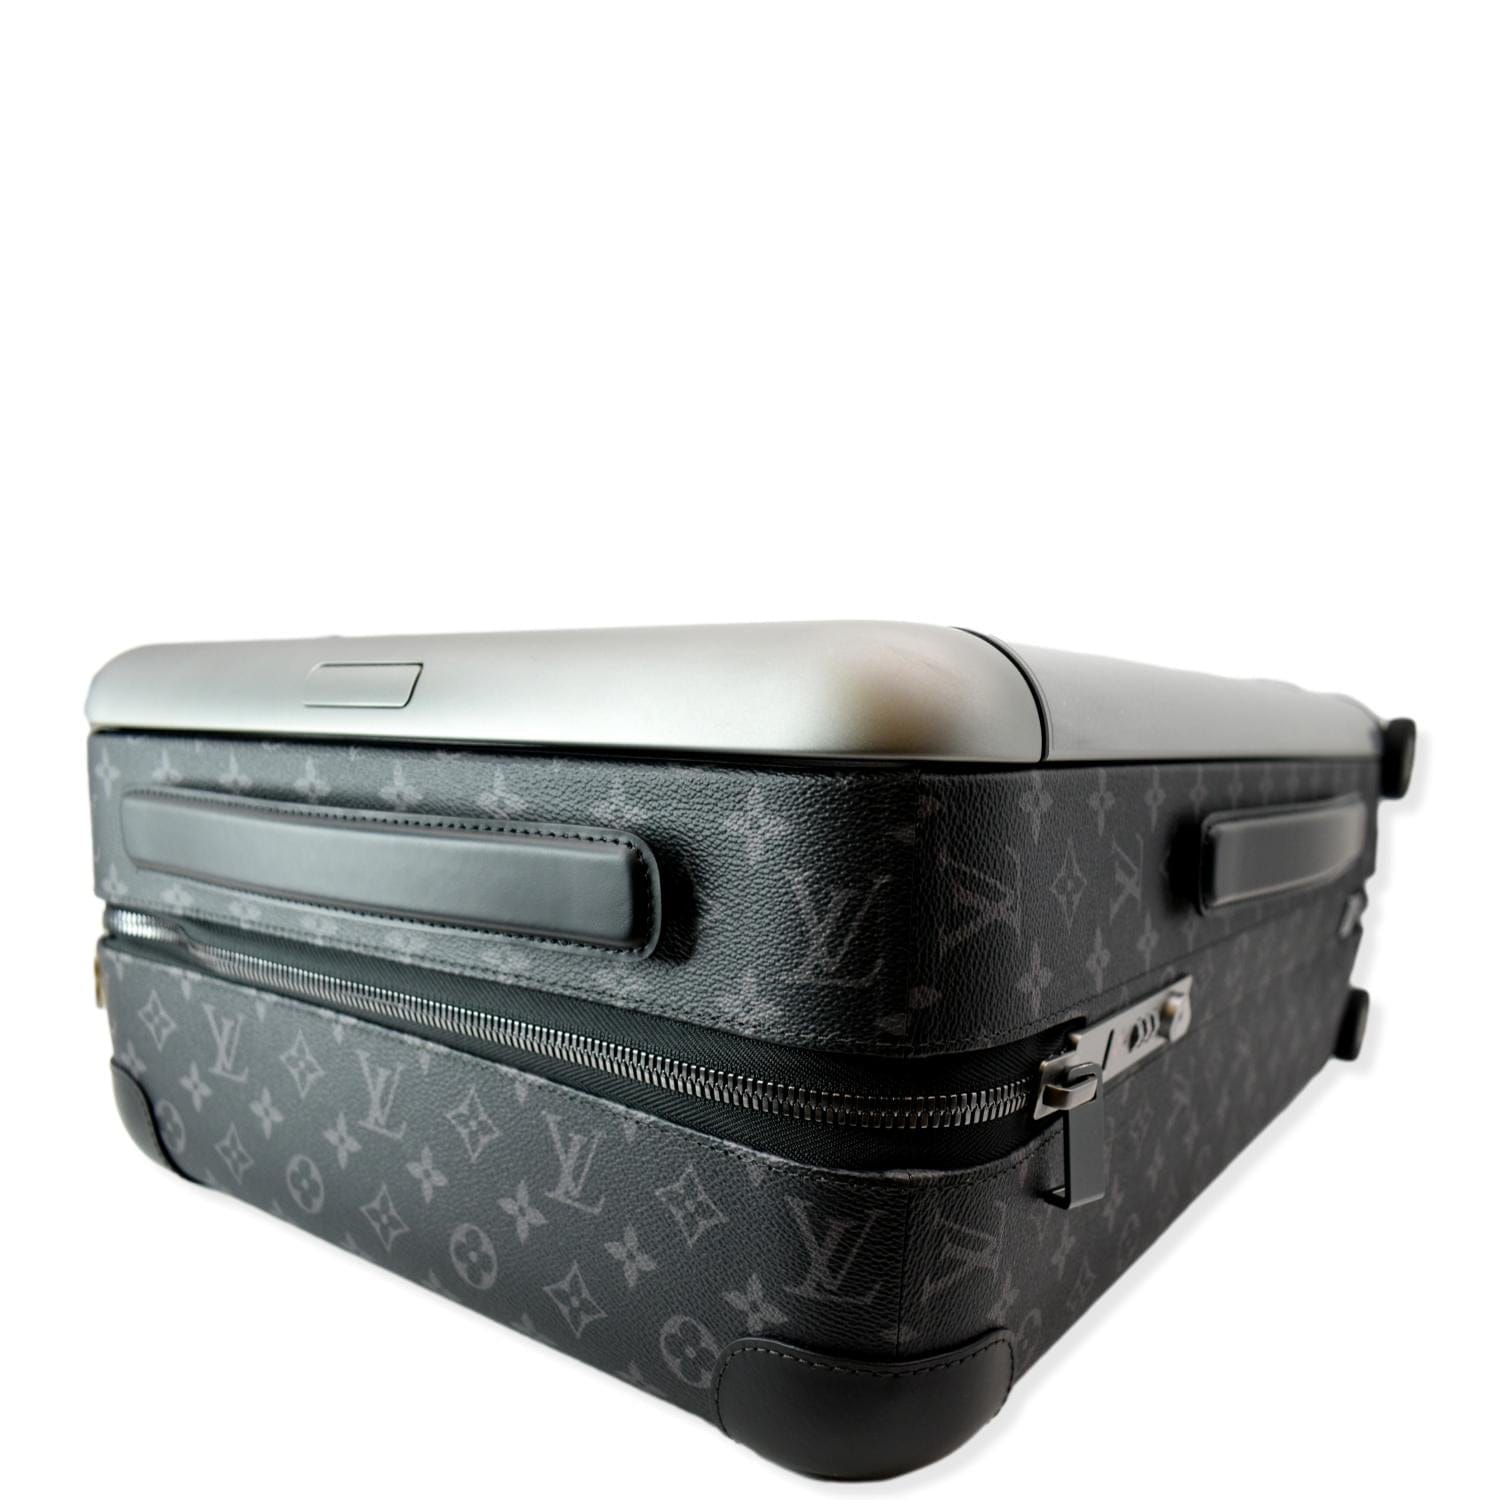 Louis Vuitton Monogram Eclipse Horizon 55 Trolley Silver Hardware, 2022  Available For Immediate Sale At Sotheby's